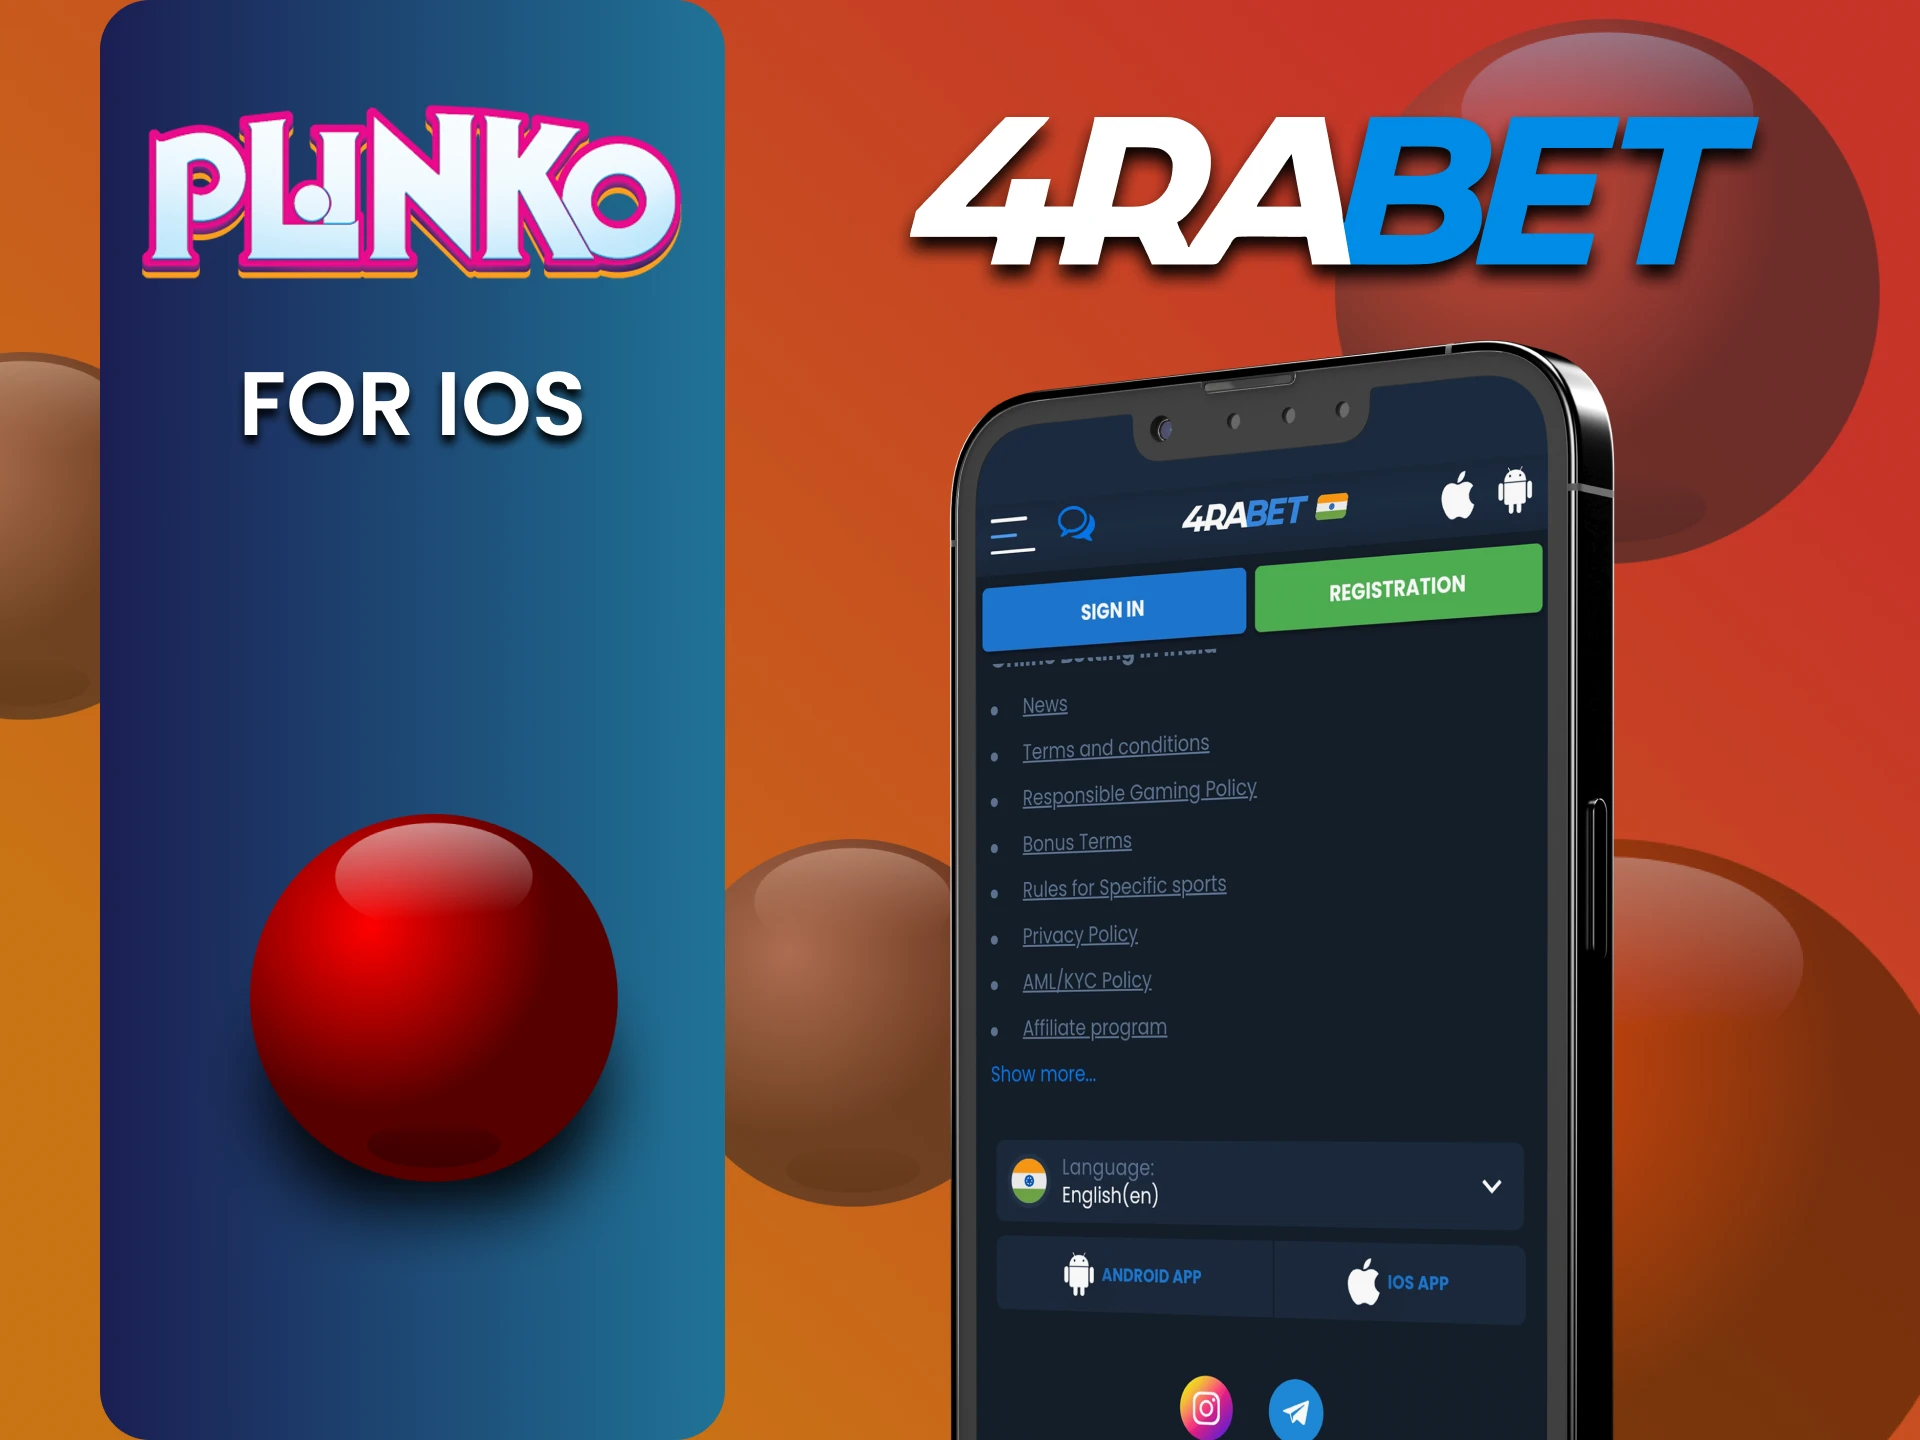 Download the 4rabet app for iOS to play Plinko.